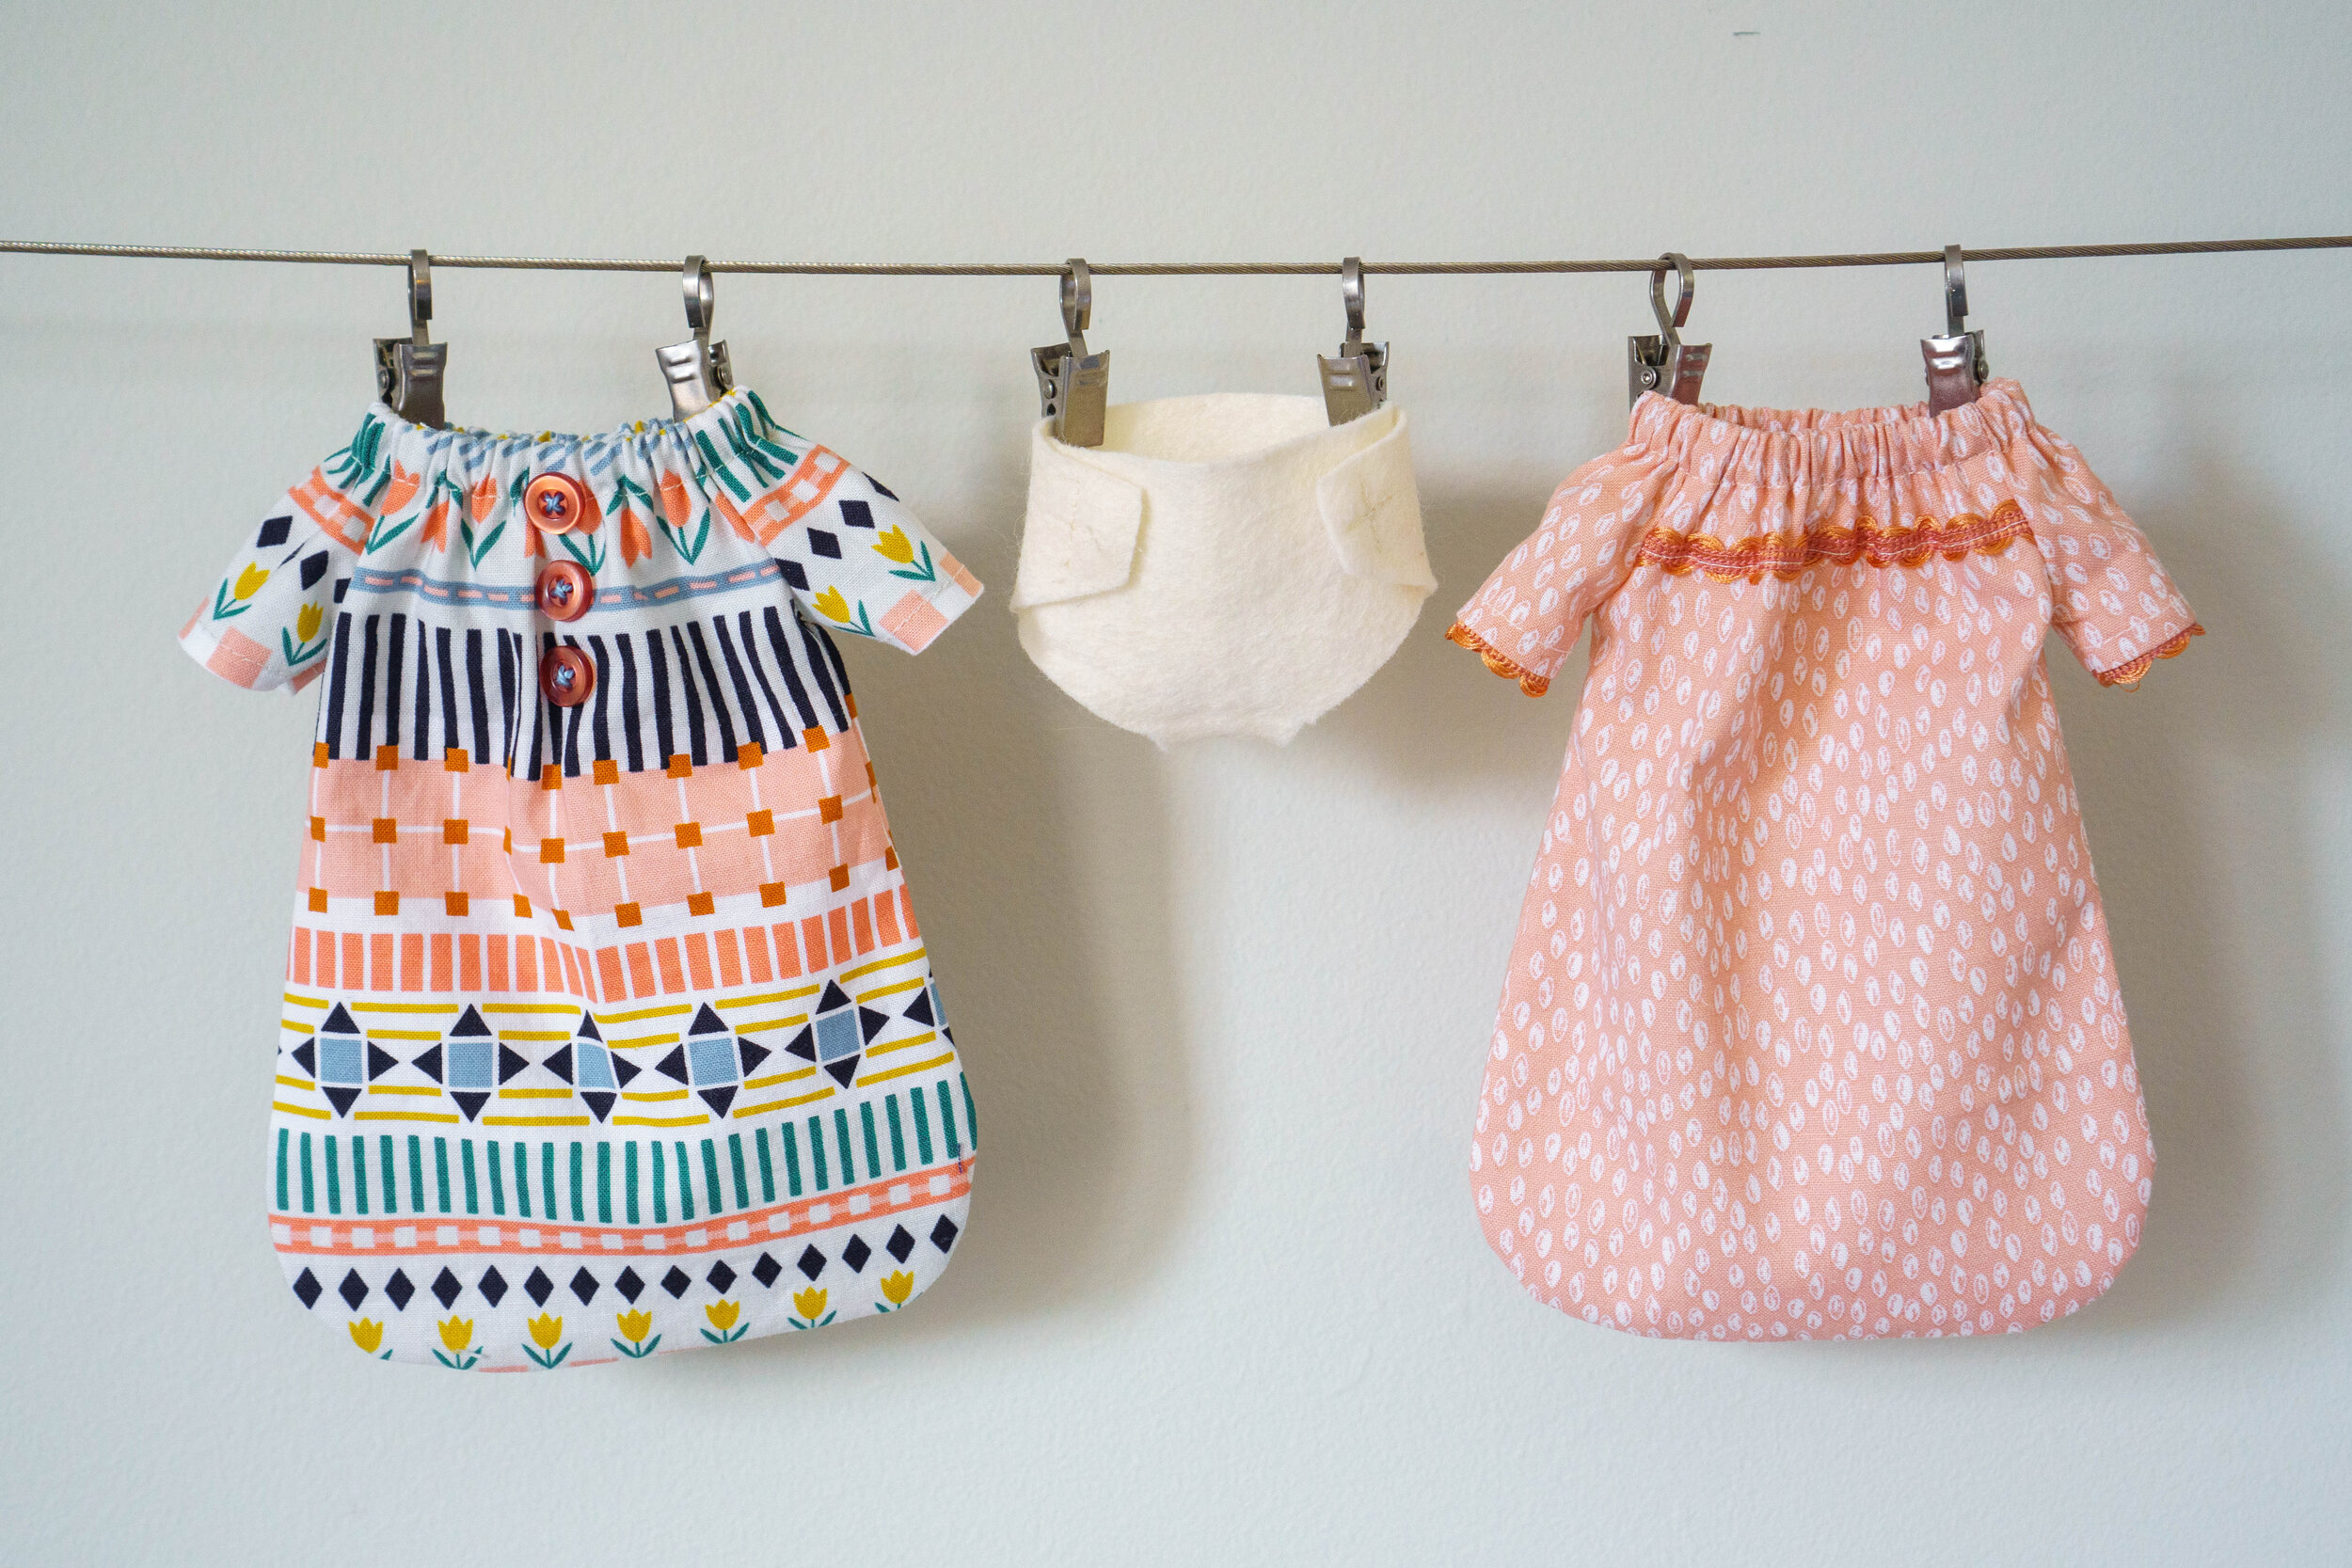 Tips for Beginners - Free Doll Clothes Patterns